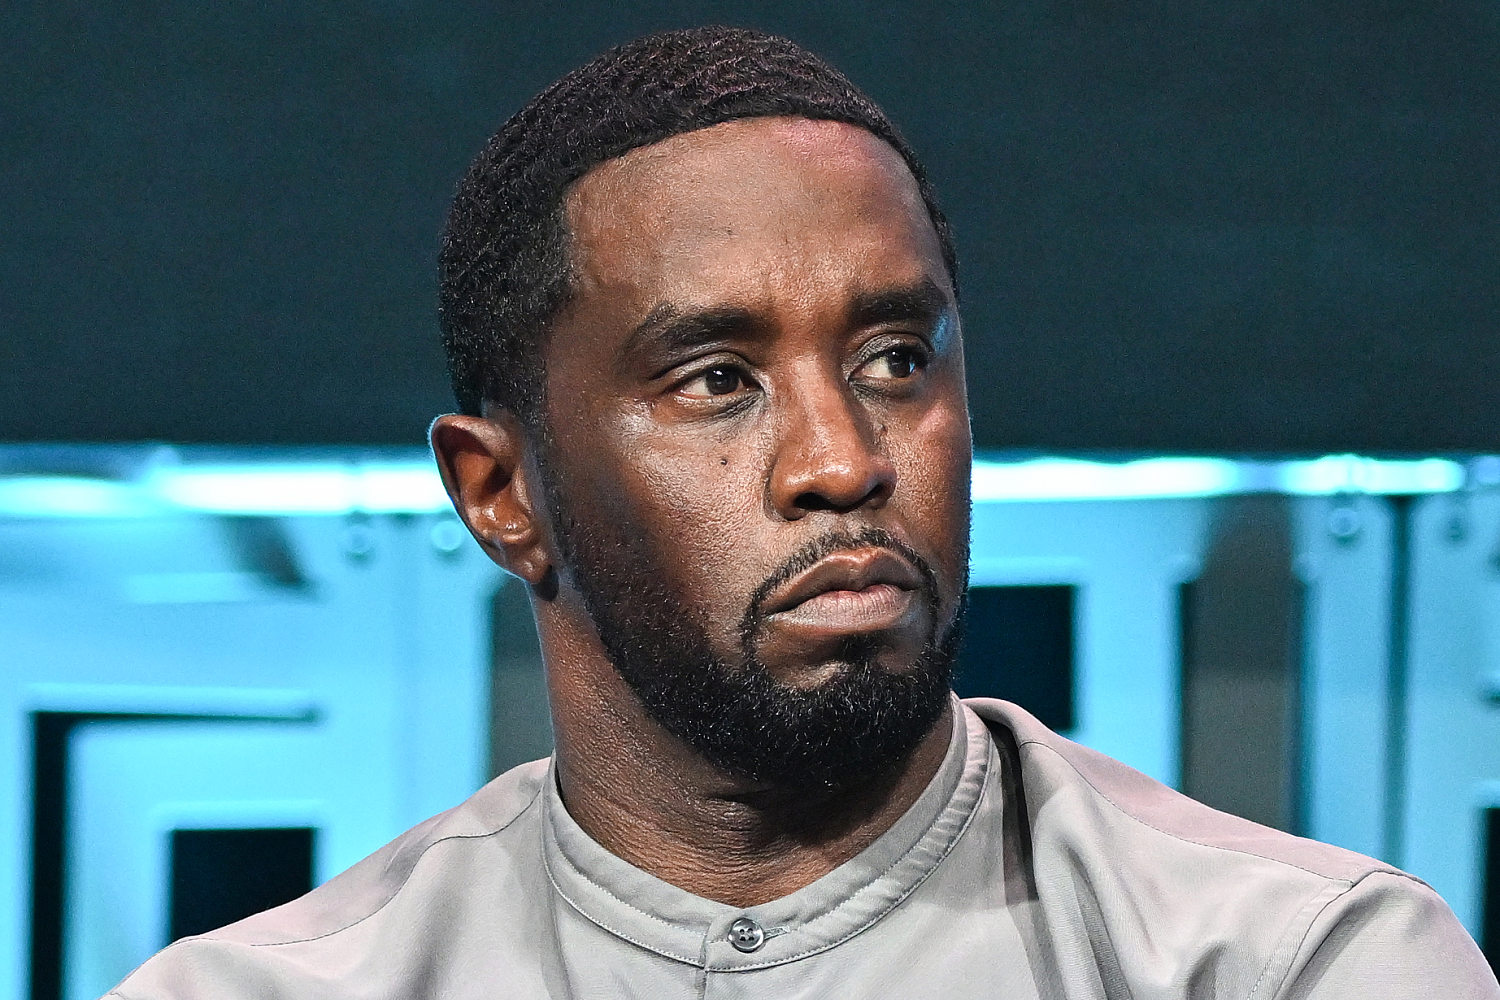 Sean 'Diddy' Combs says behavior is 'inexcusable’ in released 2016 hotel surveillance video